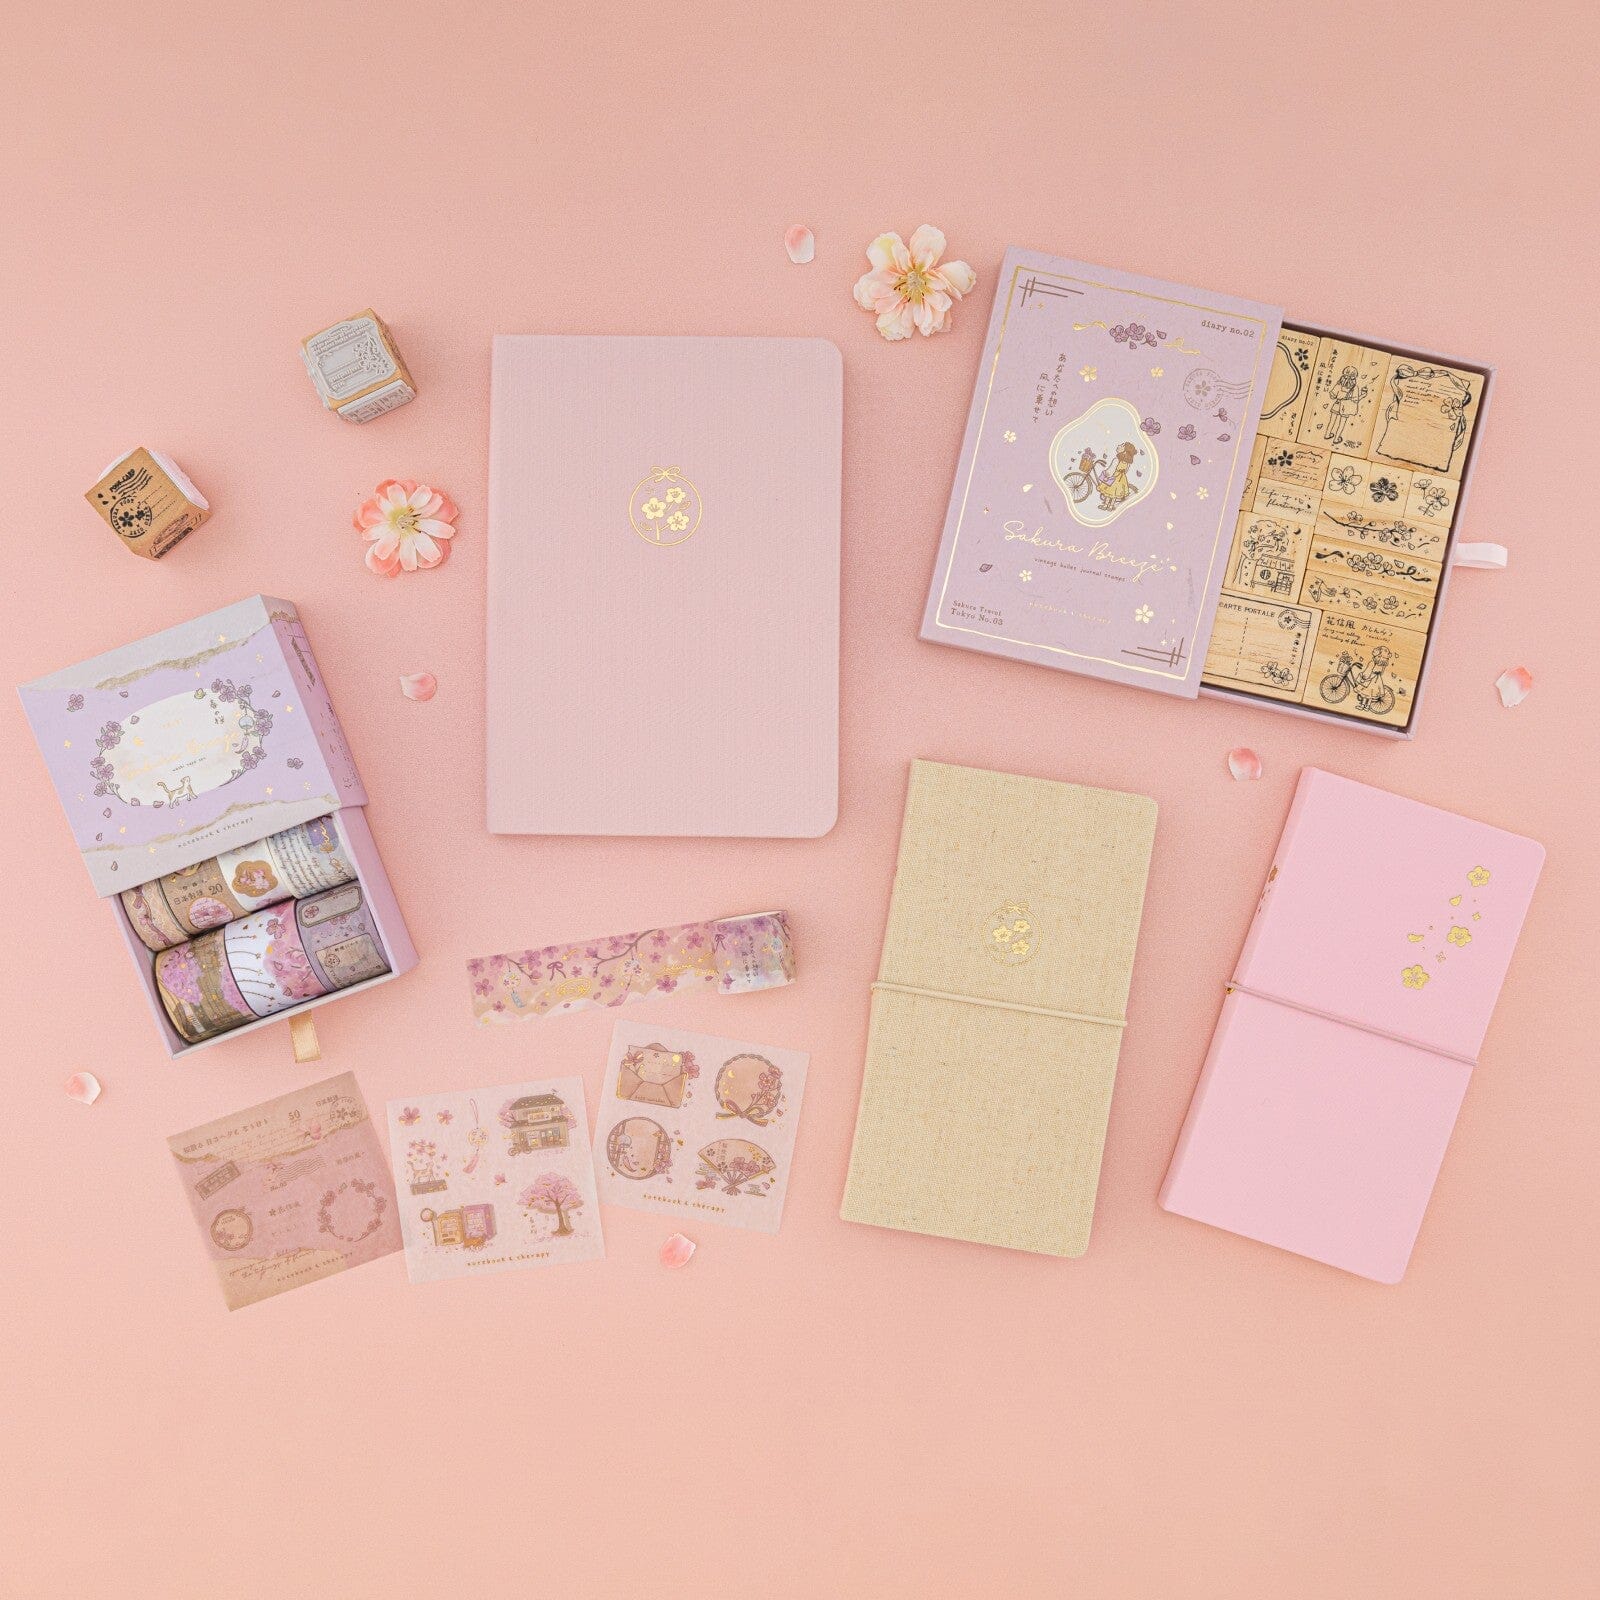 Sakura Breeze collection by Notebook Therapy